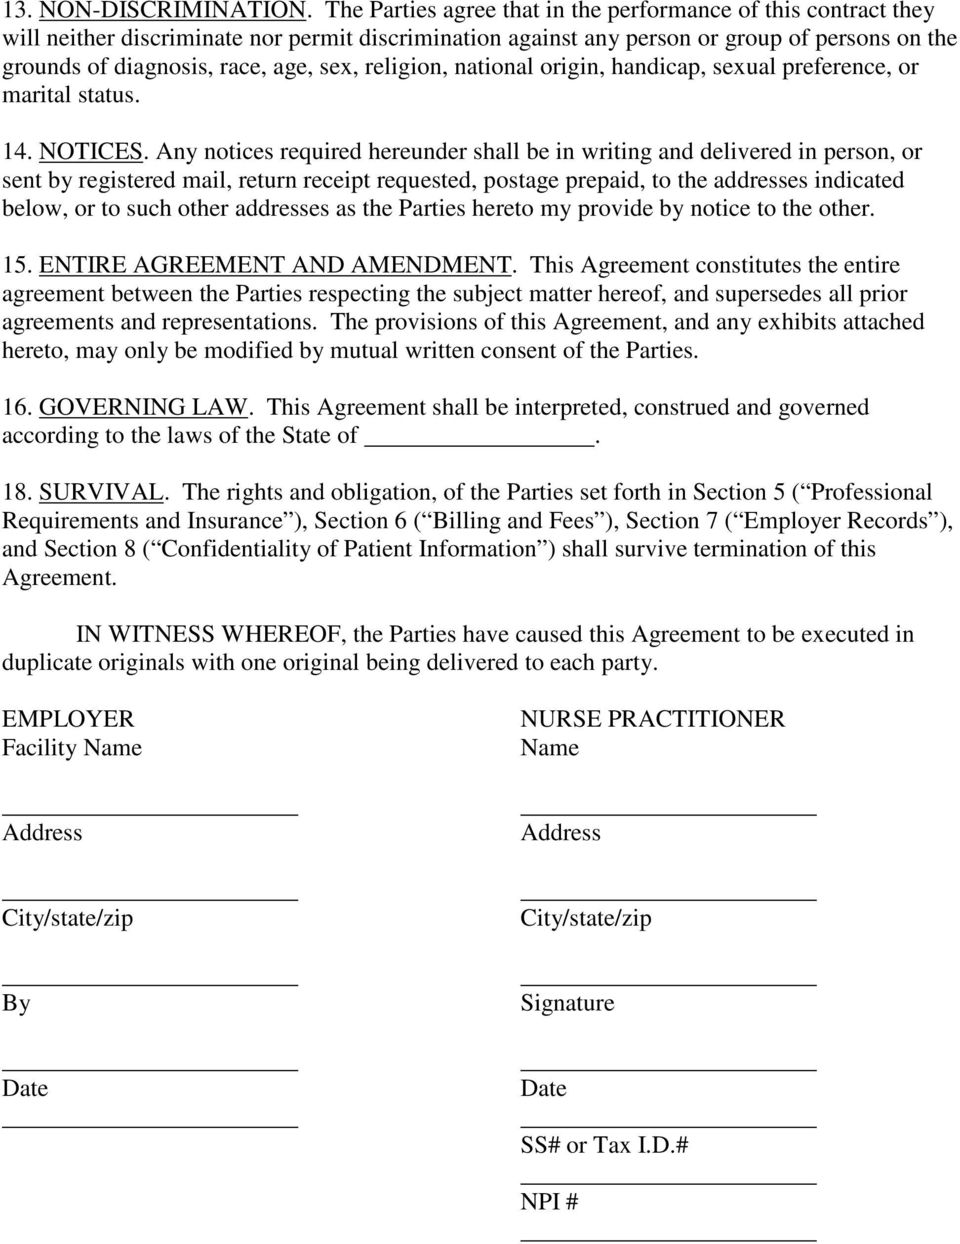 NURSE PRACTITIONER EMPLOYMENT CONTRACT TEMPLATE FOR PRIMARY CARE Throughout physician consulting agreement template